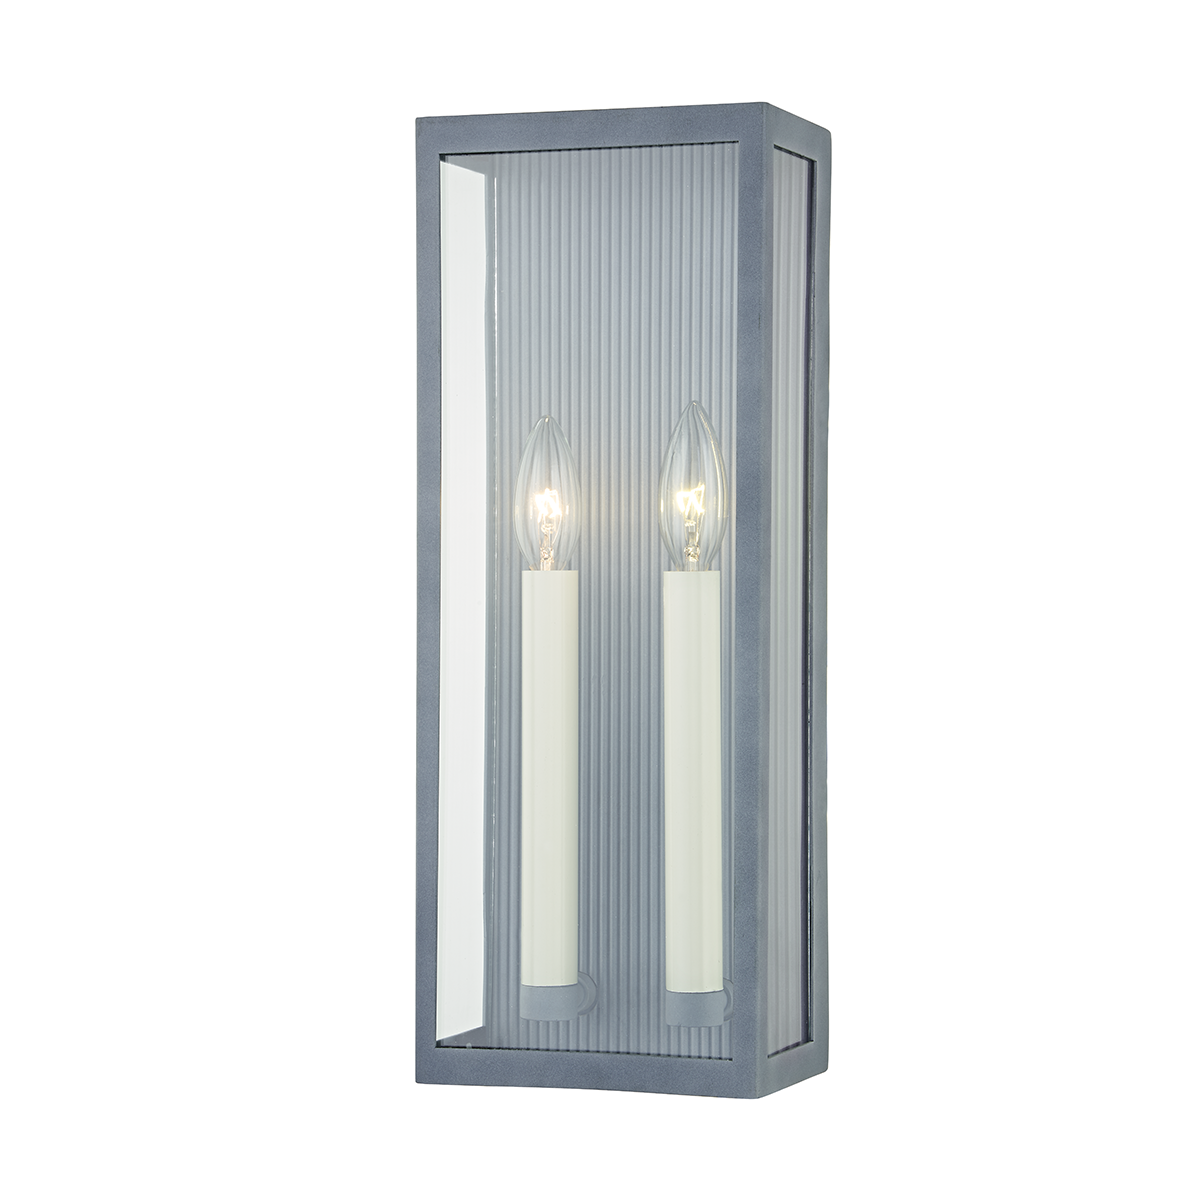 Troy VAIL 2 LIGHT EXTERIOR WALL SCONCE B1032 Outdoor l Wall Troy Lighting   